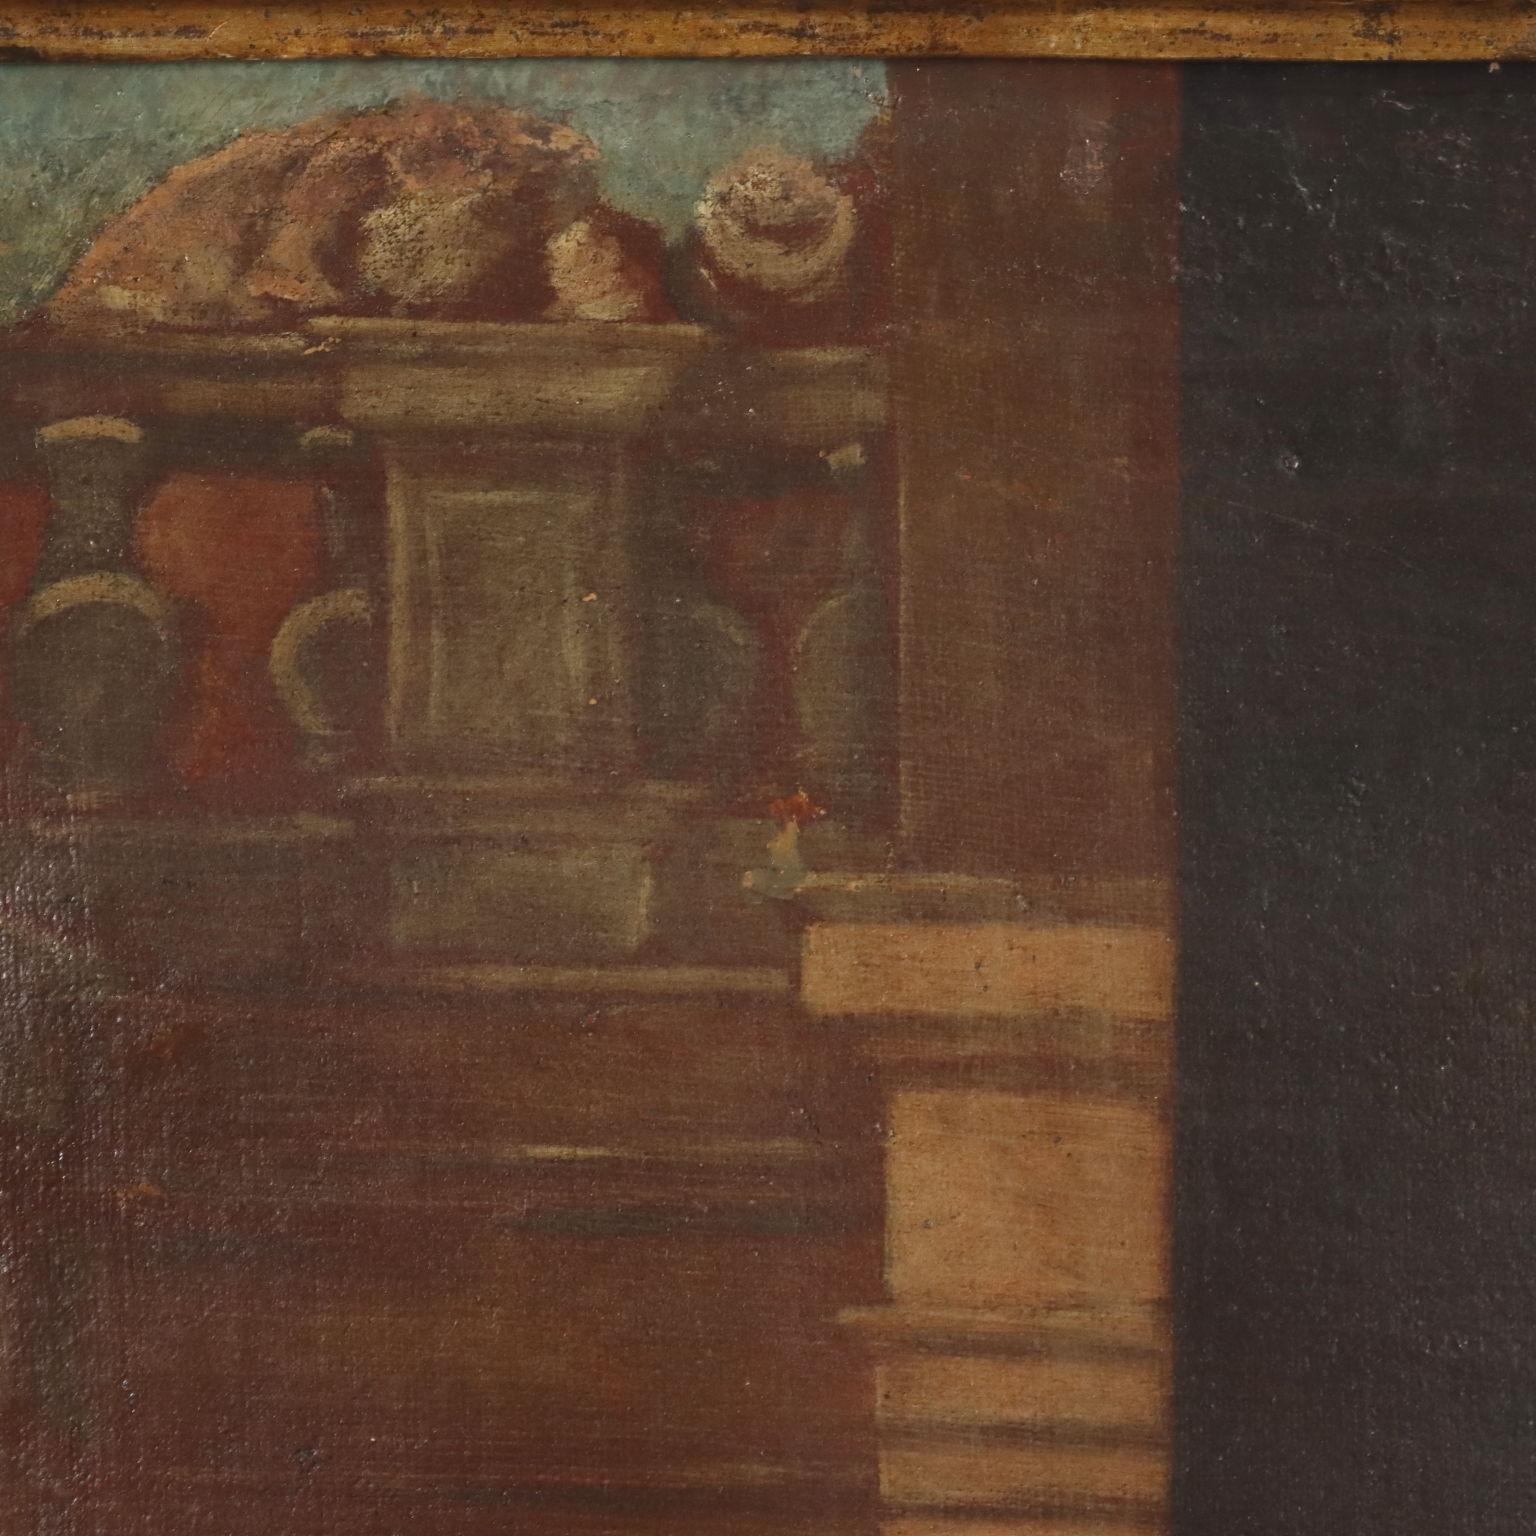 Oil painting on canvas. Venetian school of the seventeenth-eighteenth century. On the back there is a label from the Di Rosa Art Gallery, which attributes the work to the 